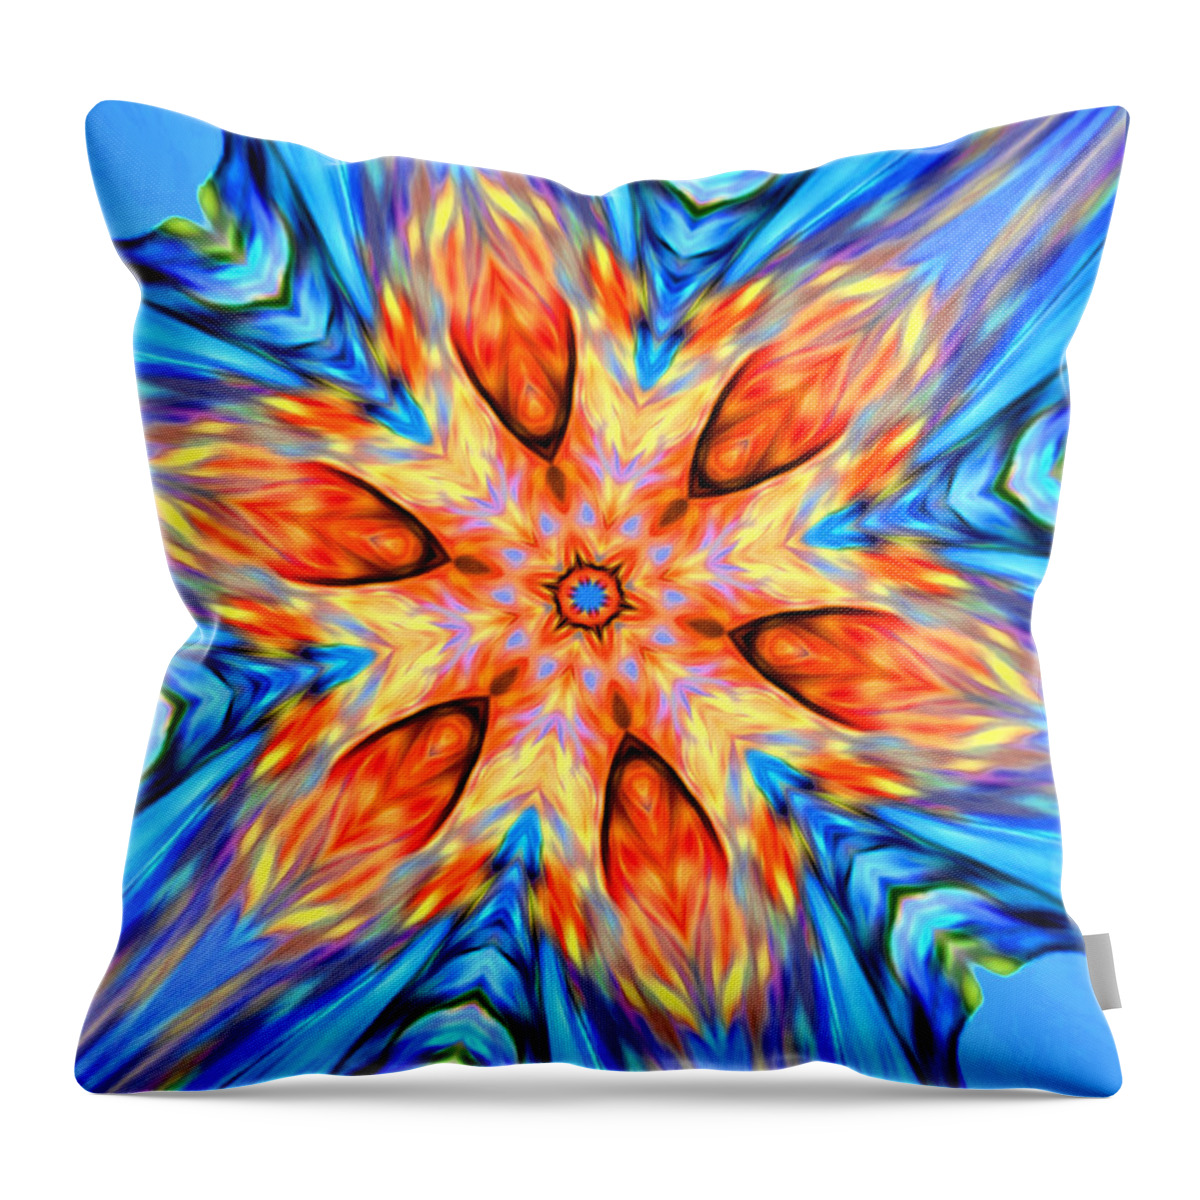 Abstract Throw Pillow featuring the digital art Tropical Fire Flower - Abstract by Ronald Mills